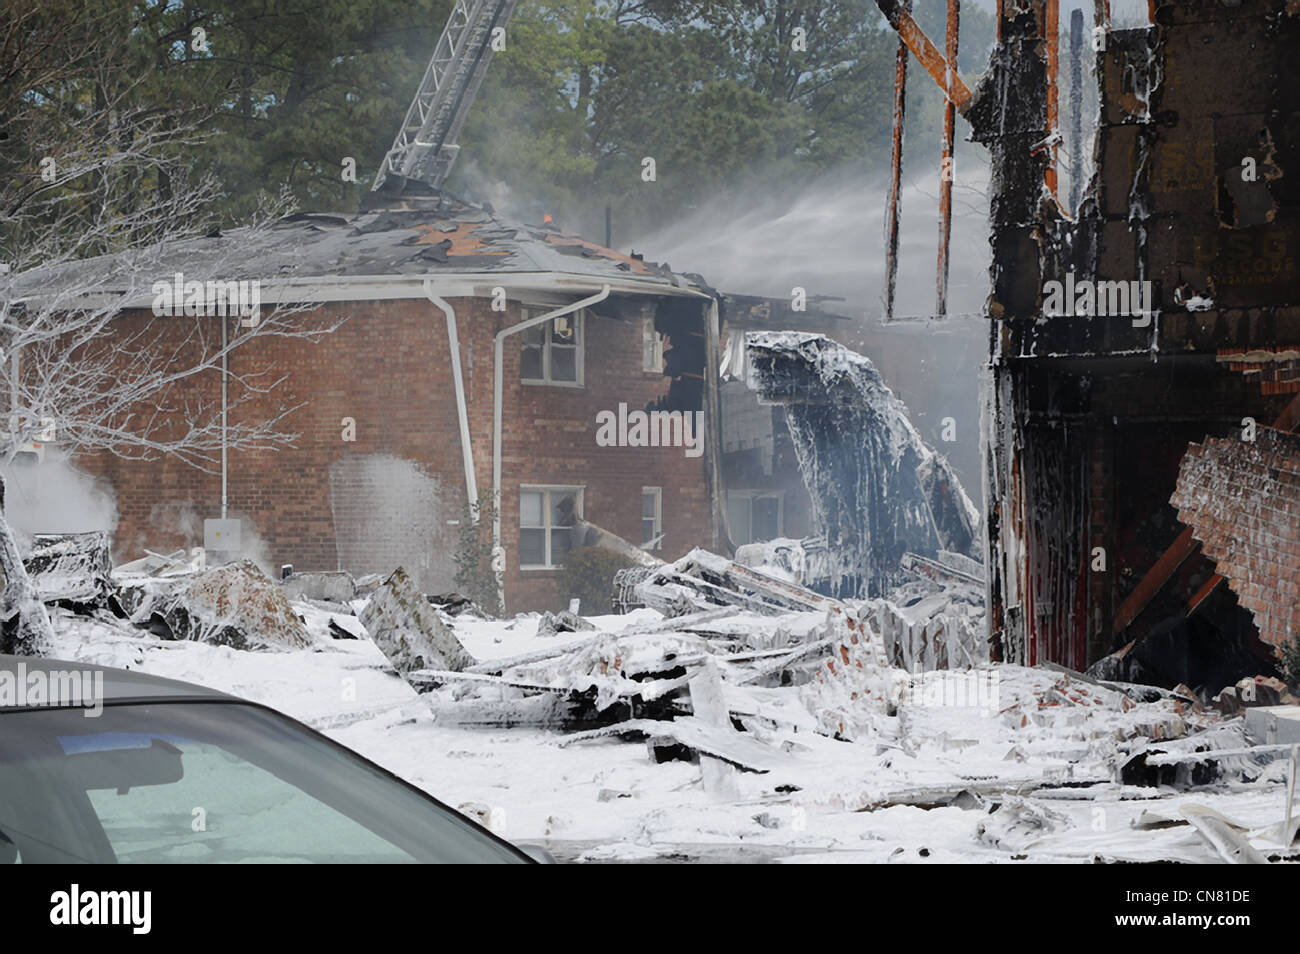 Firefighting foam covers the scene of a crash where a US Navy F-18 aircraft crashed after taking off from Naval Air Station Oceana April 6, 2012 in Virginia Beach, VA. Stock Photo